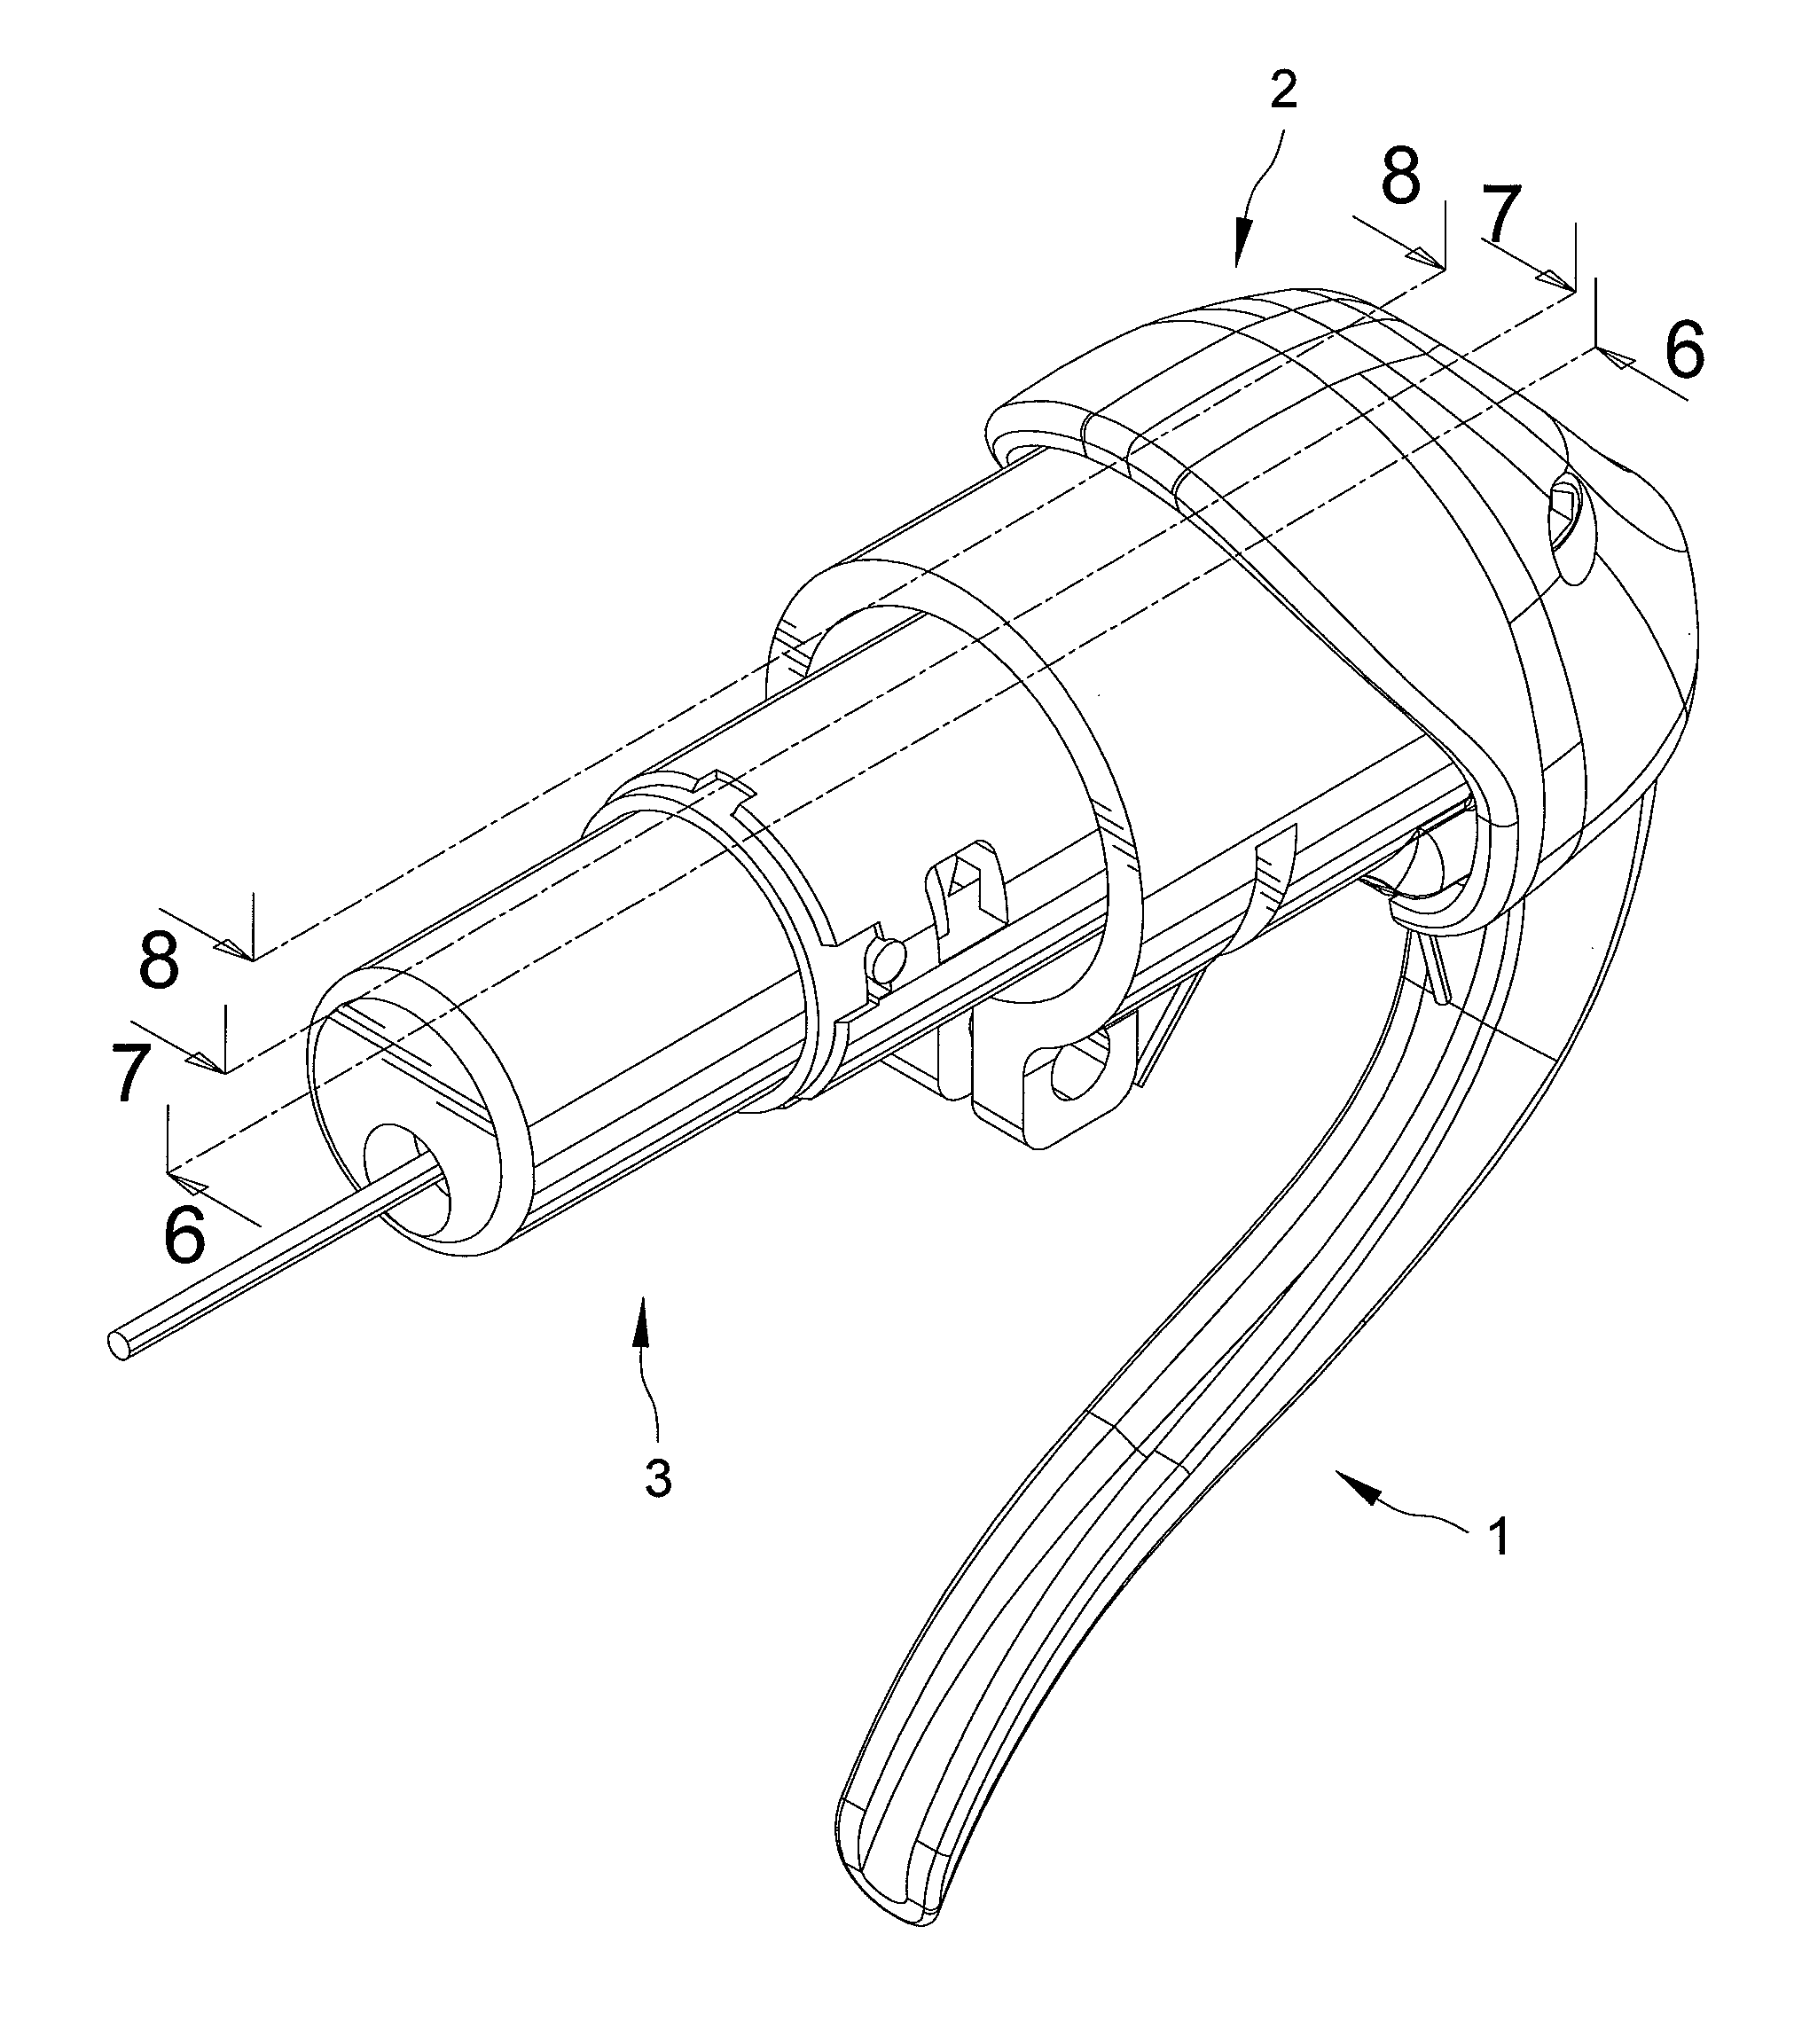 Shift control device for bicycle